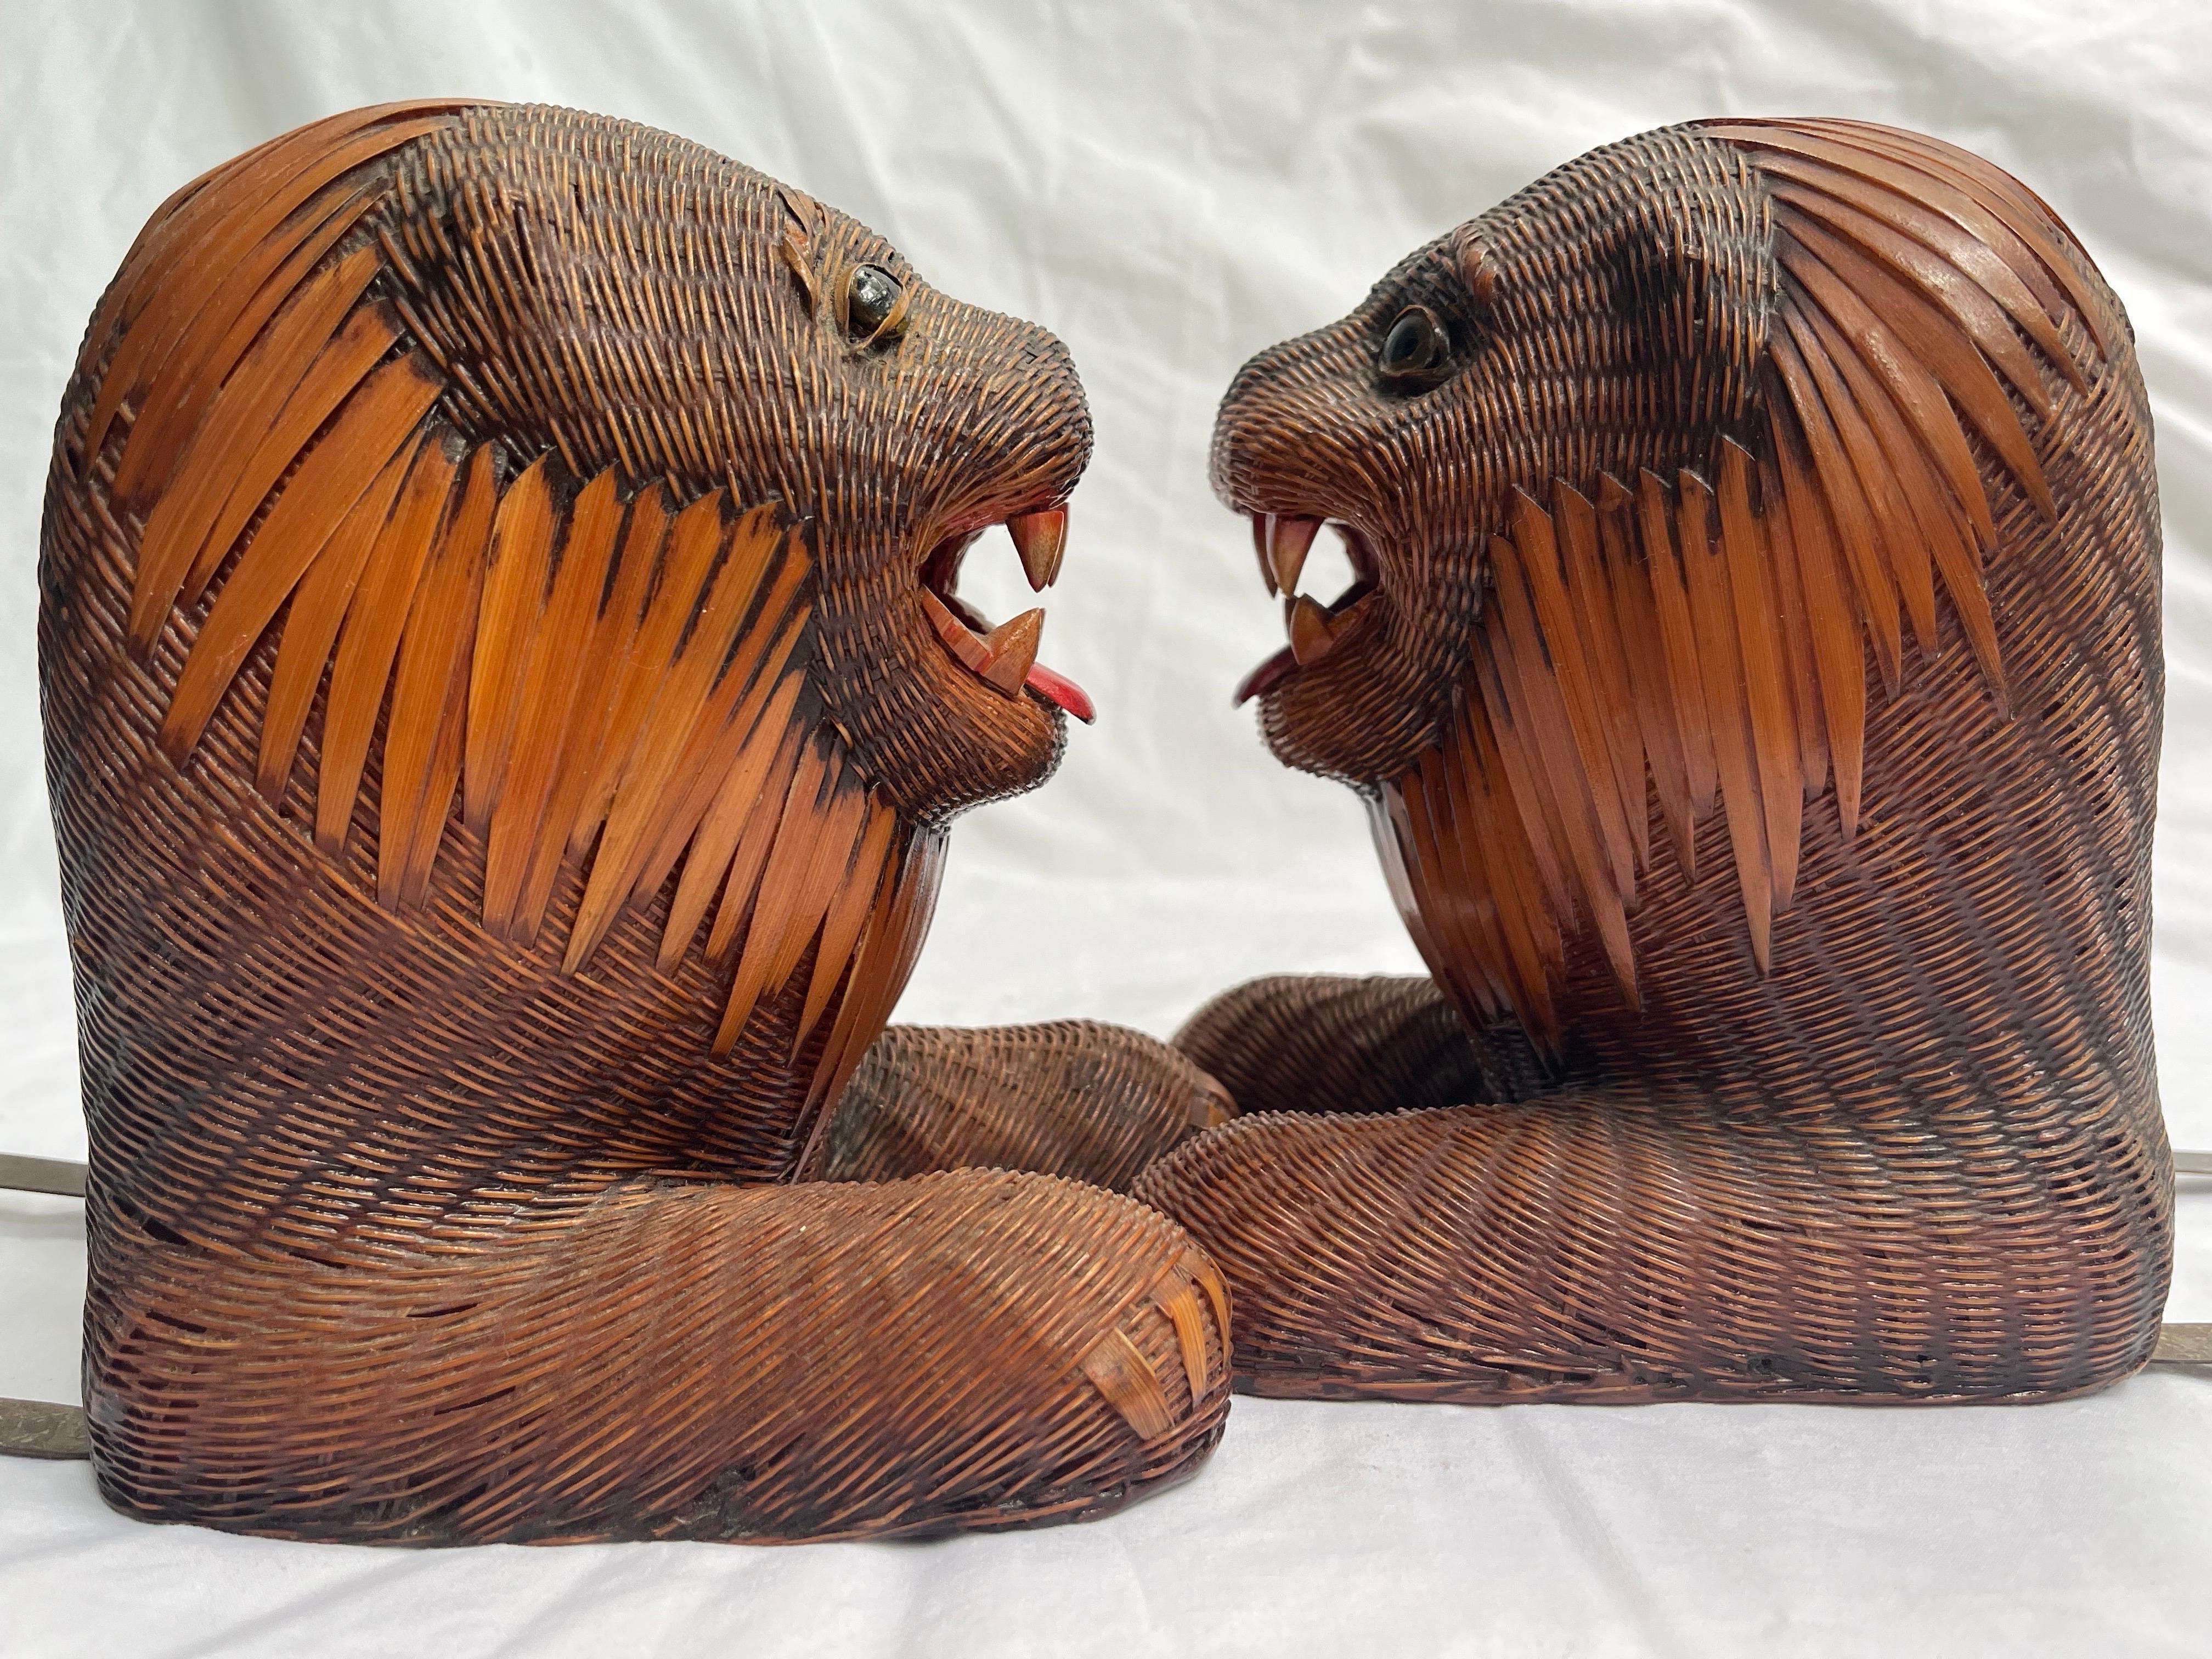 A beautiful pair of vintage circa 1970's roaring lion bookends most likely by the Shanghai Handicrafts Collection of China. The tightly woven thin reed or fine wicker forms a gorgeous pair of lions mounted as bookends. Their front paws are